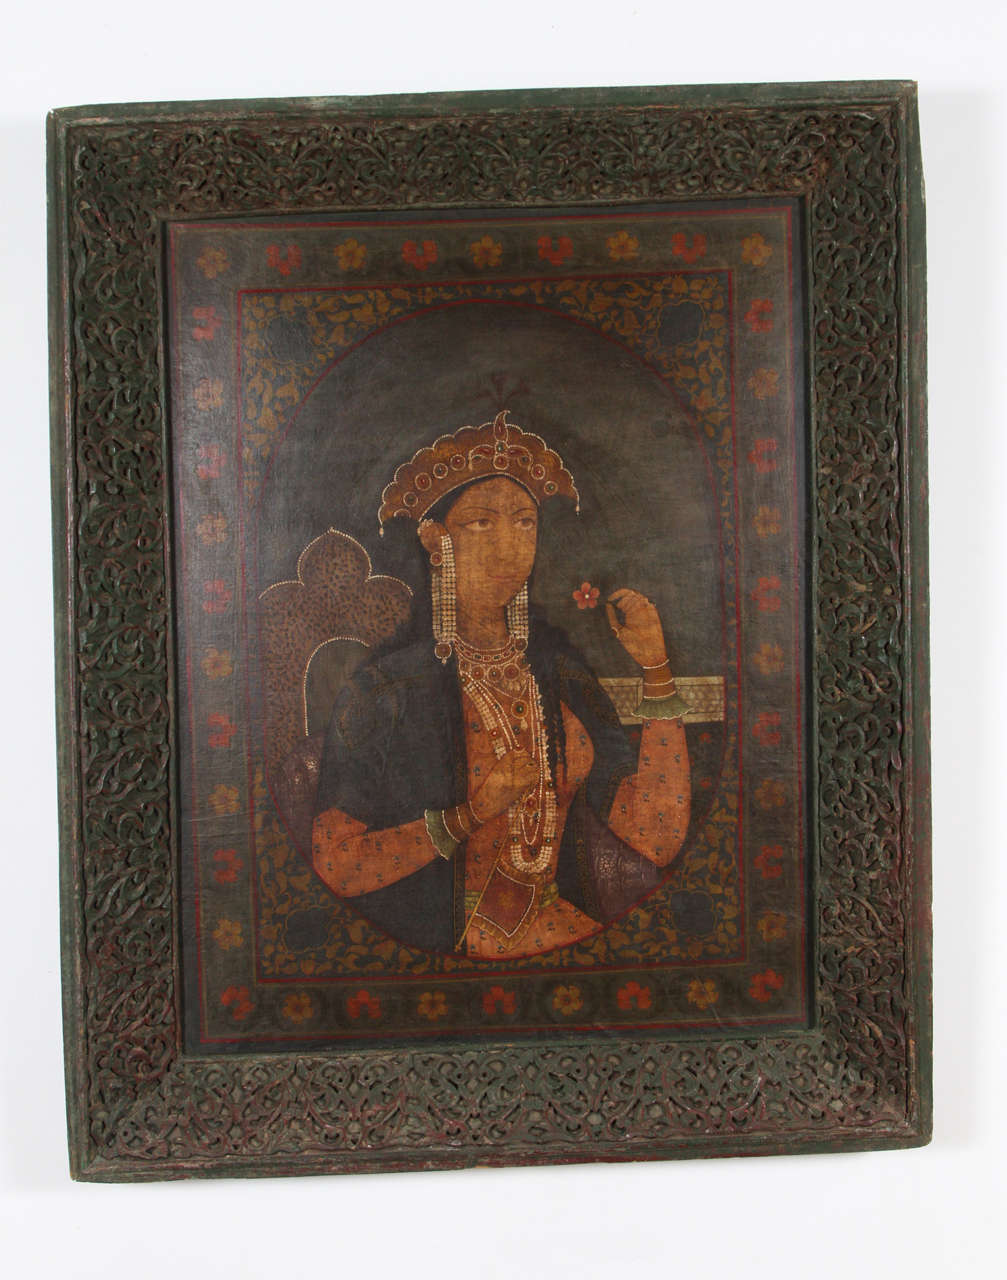 Pair of framed oil on canvas painting of Mughal Emperor Shah Jahan and the Empress Mumtaz Mahal.
The splendor of India, oil painting Mughal Emperor Shah Jahan and the Empress Mumtaz Mahal wearing spectacular jewelry. The Rajhastani wooden dark